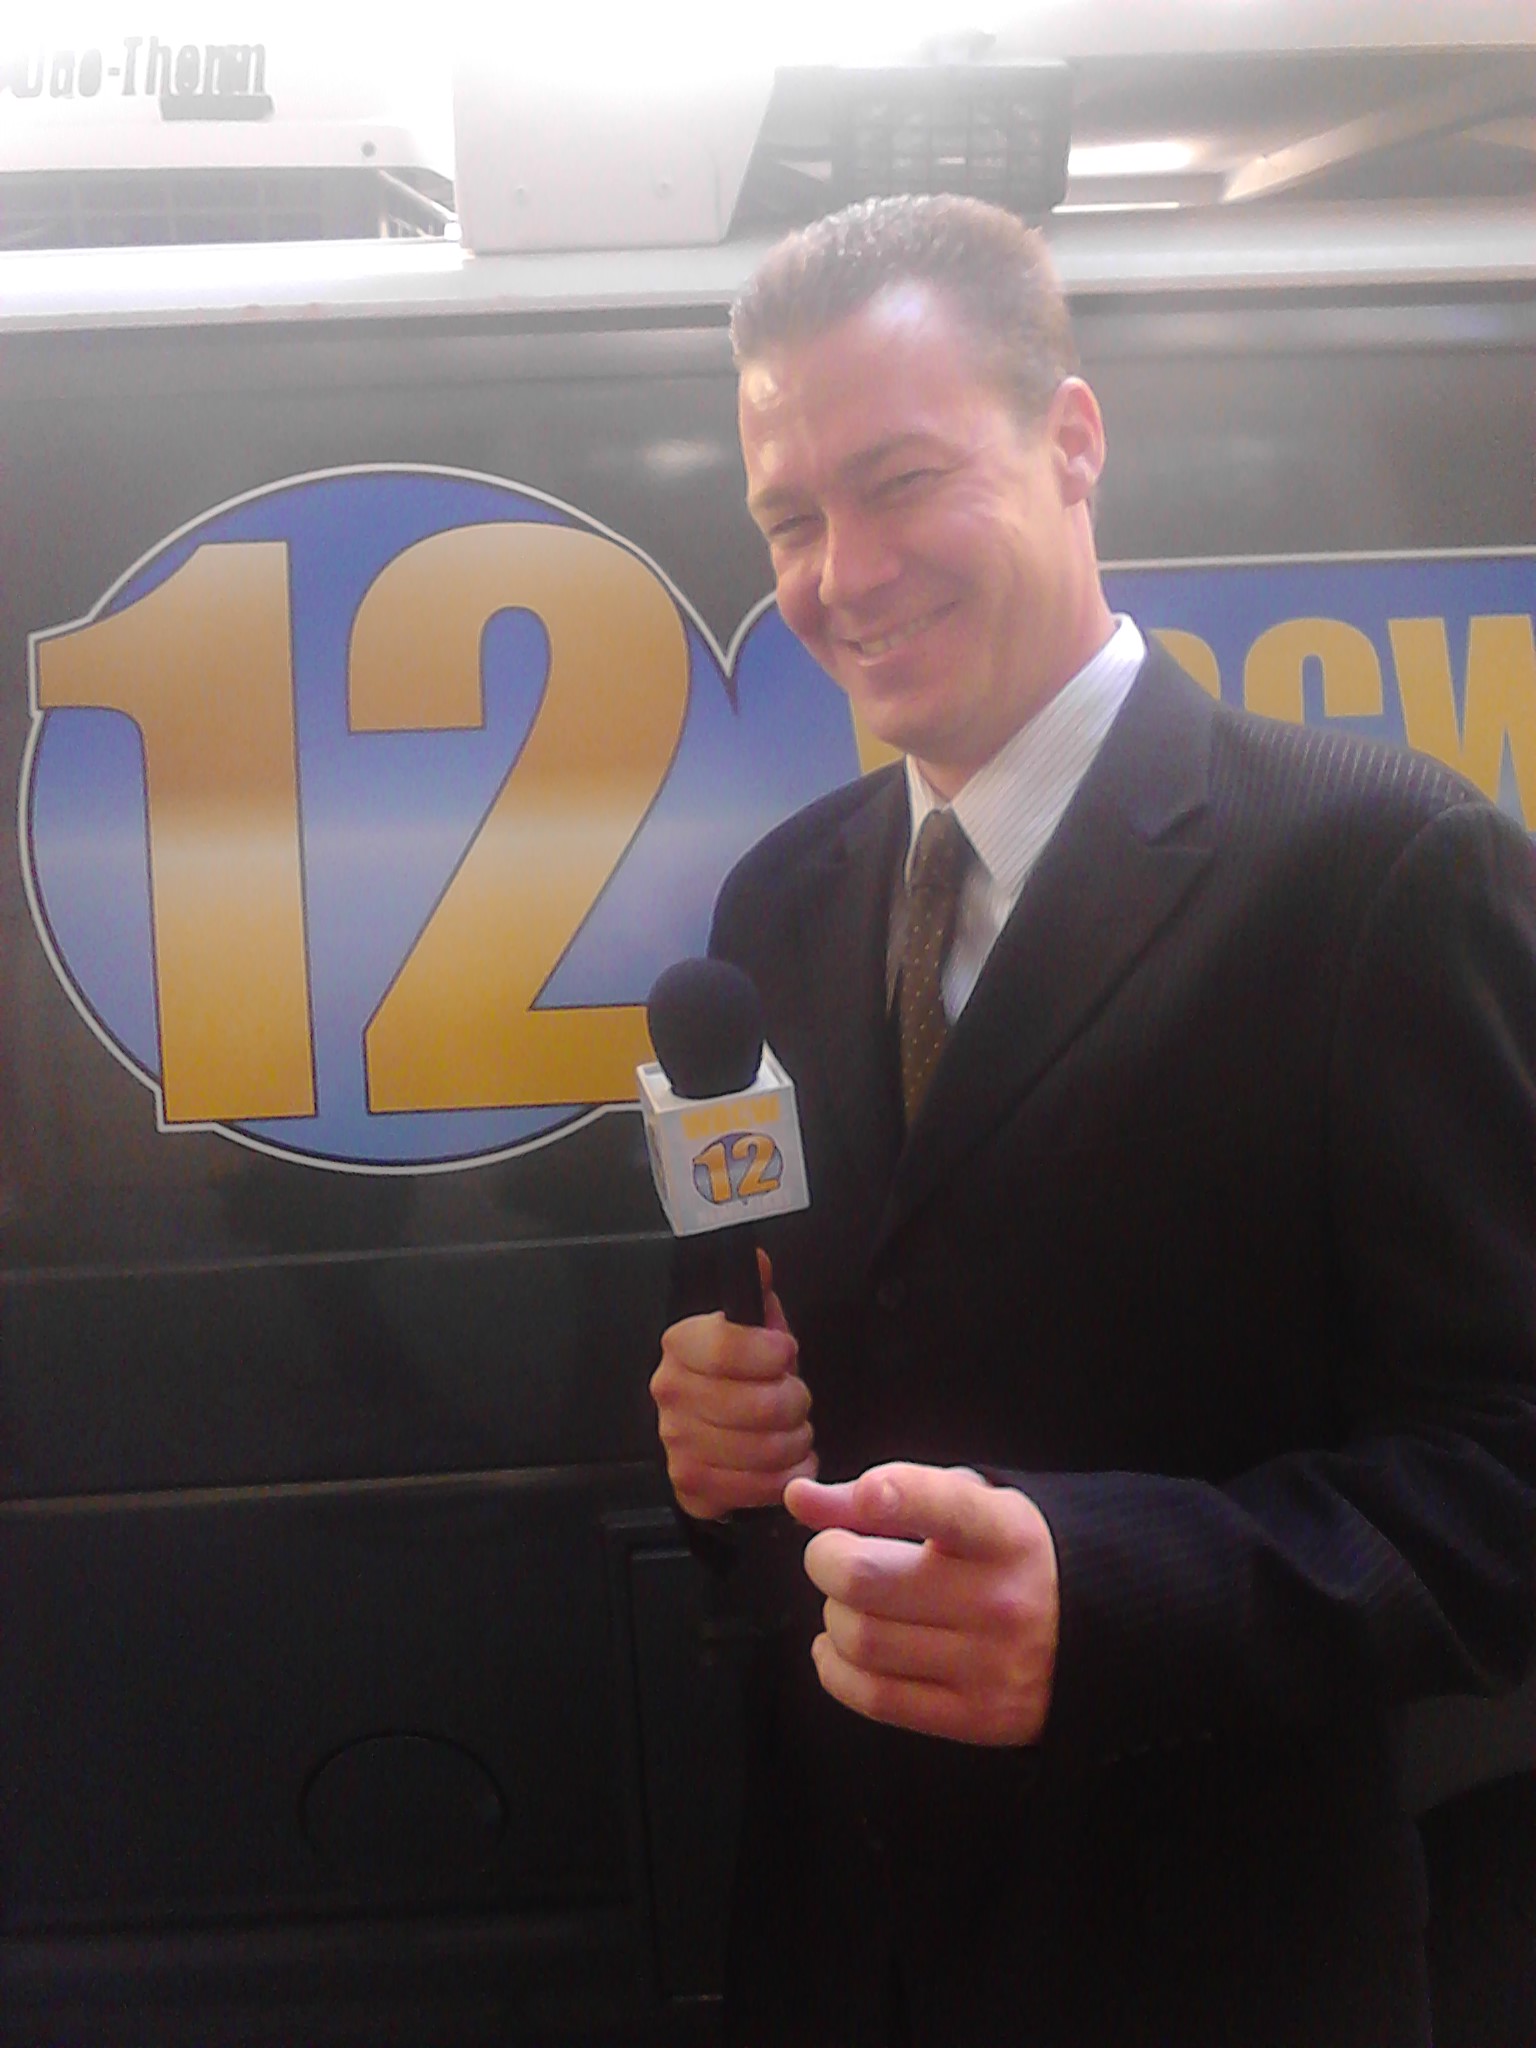 WBCW Channel 12 News Chip Bauersox reporting on location.